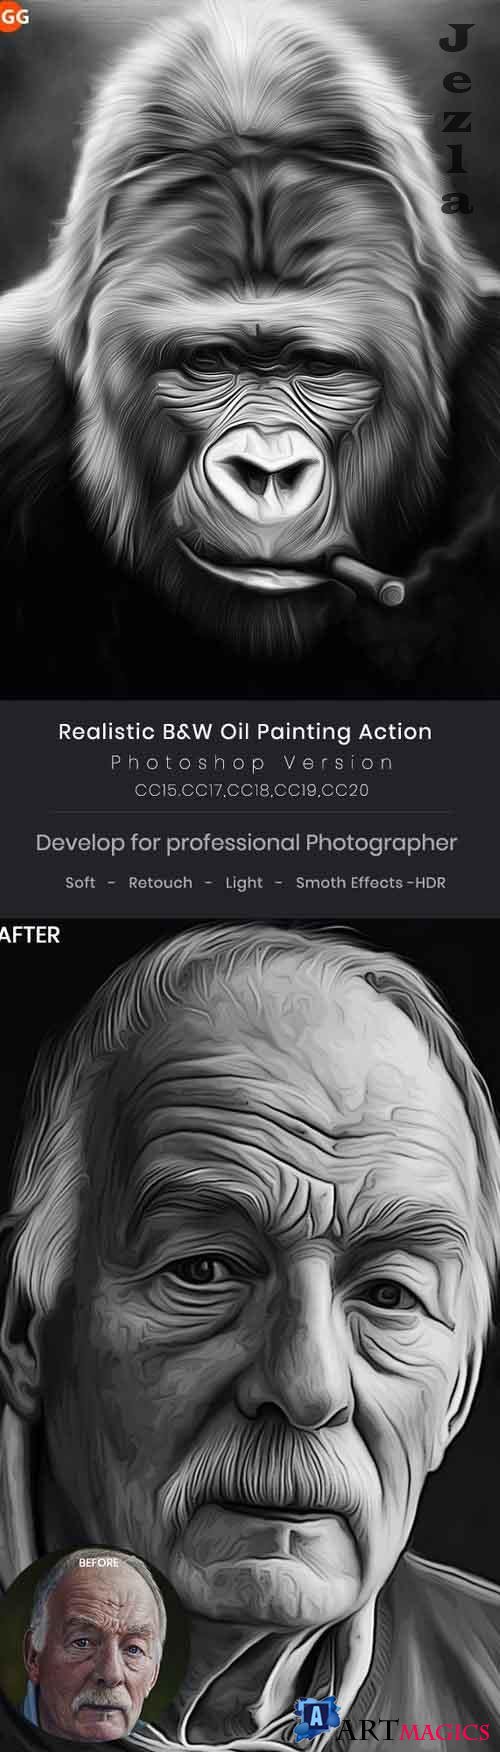 Realistic B&W Oil Painting Action 26326529